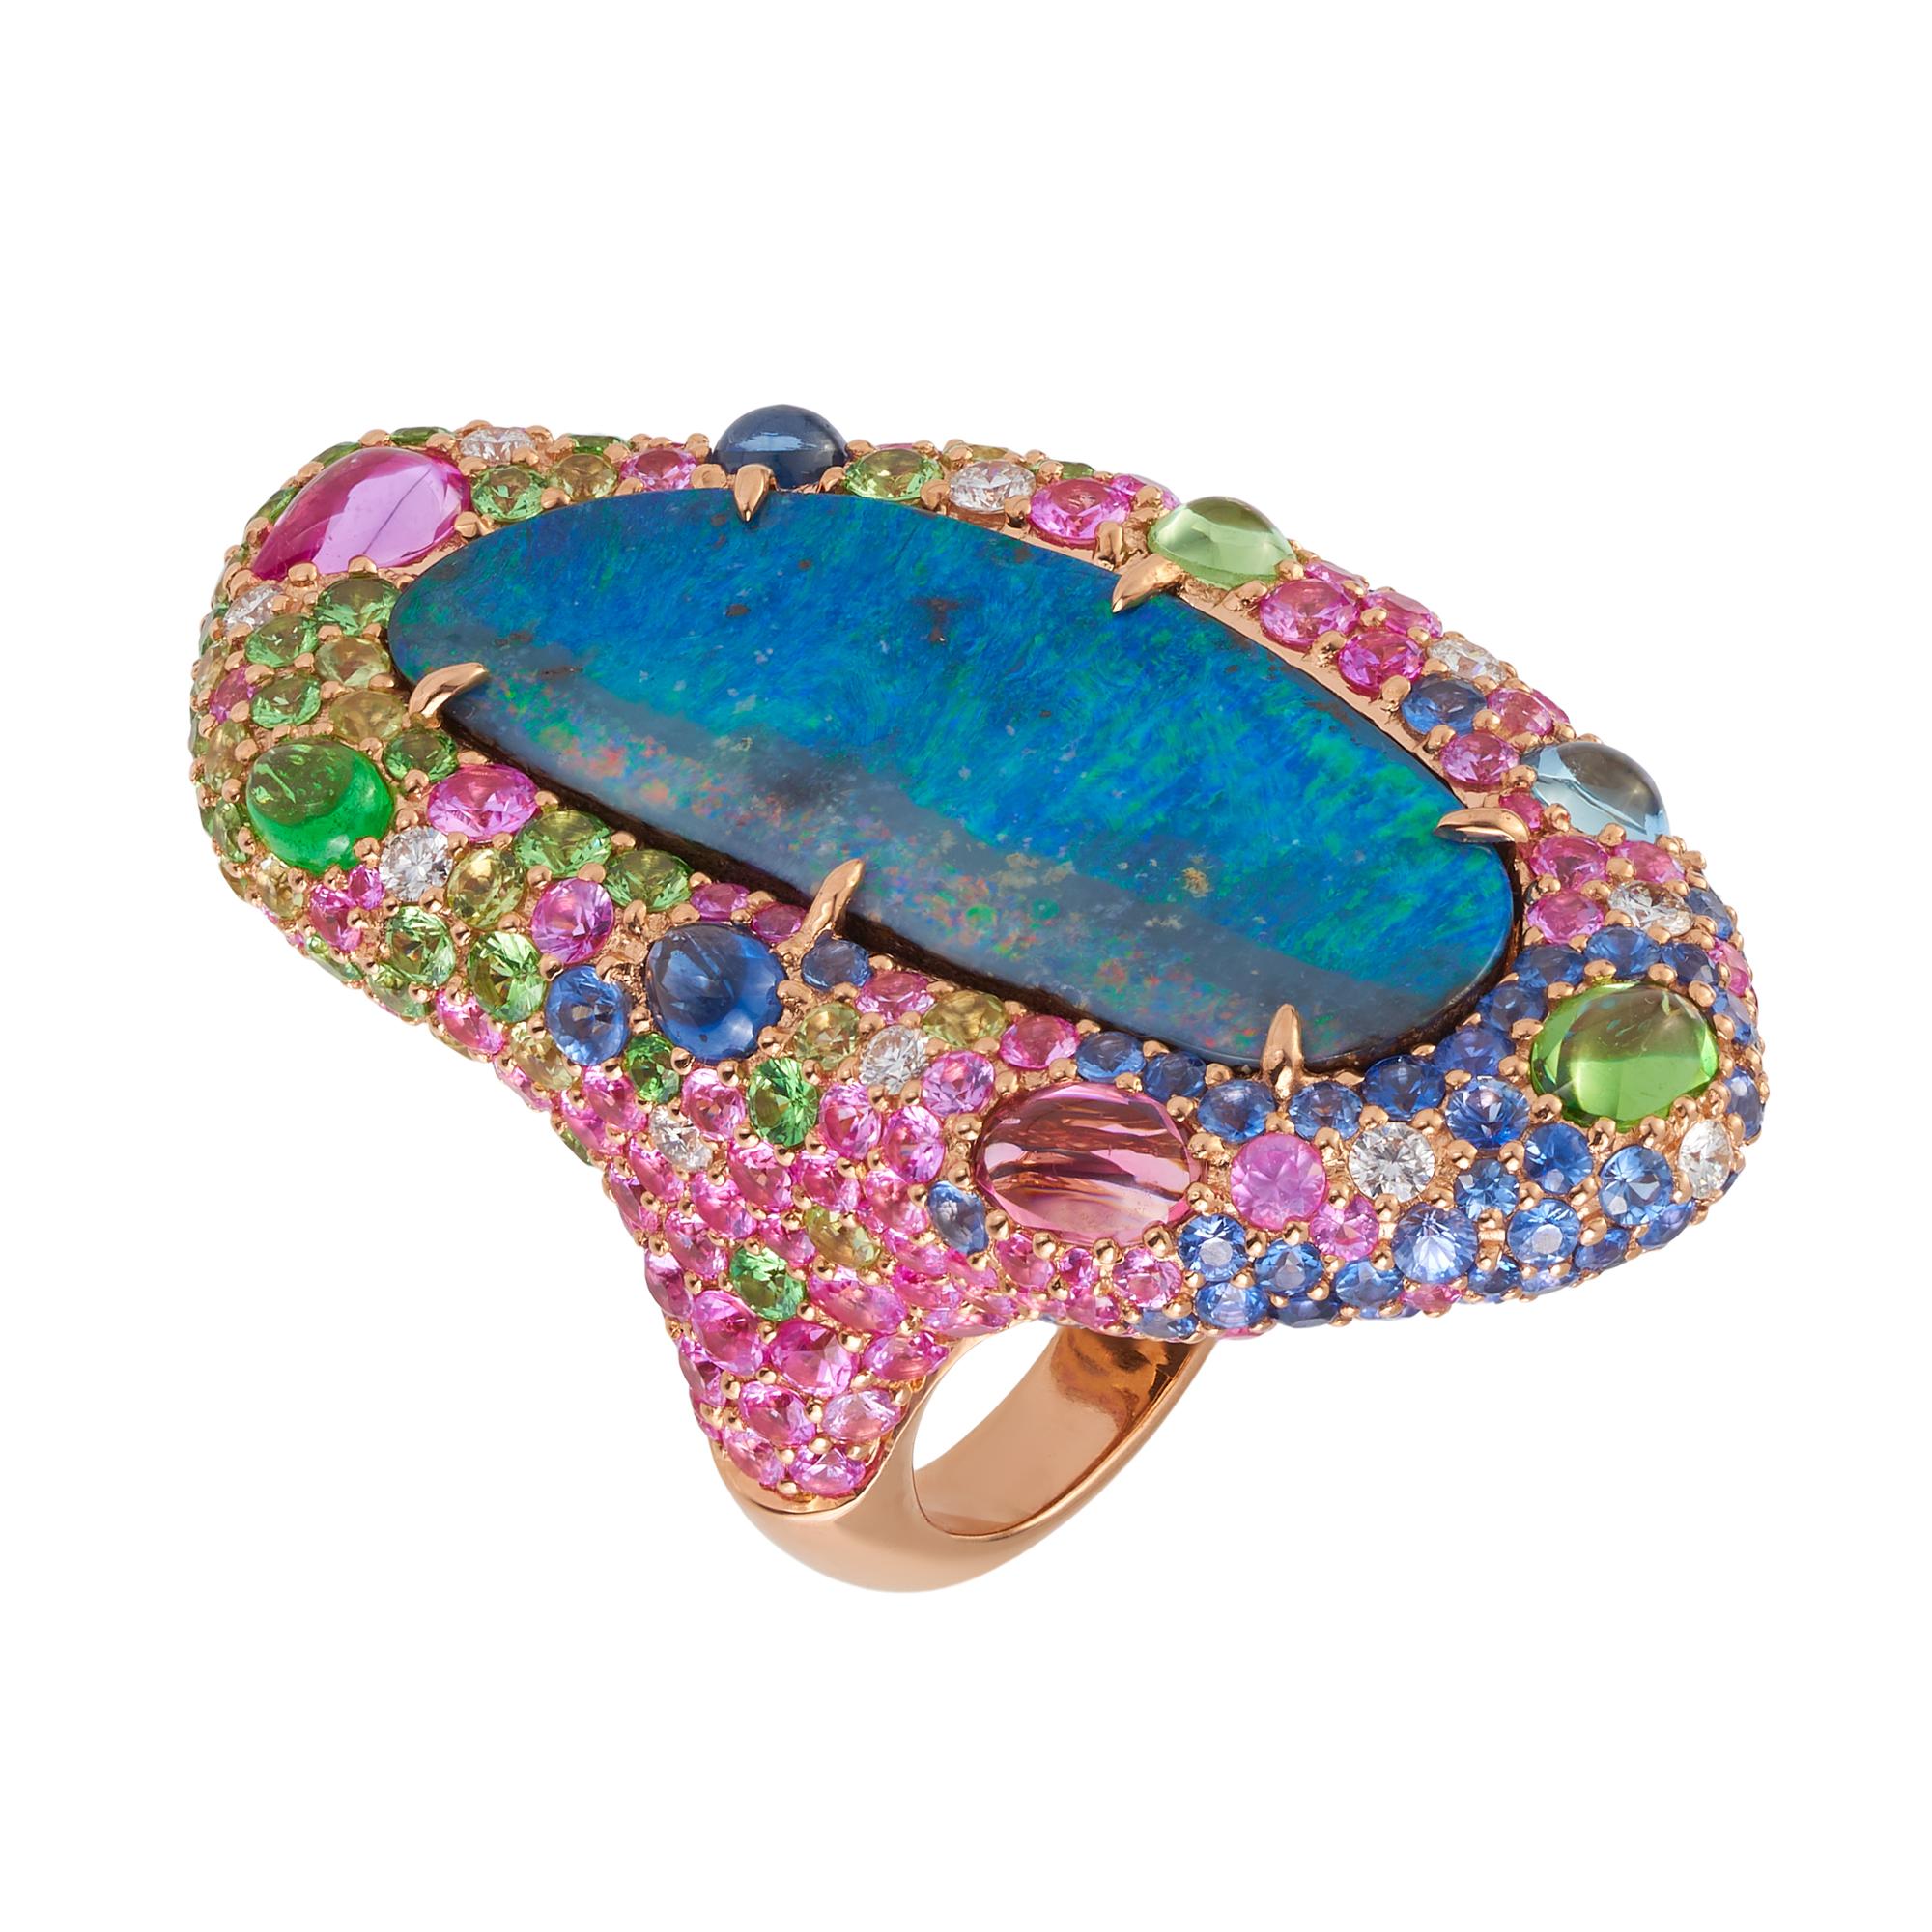 18 karat Rose Gold Opal Ring, featuring a 14.47ct Natural Queensland Boulder Opal, surrounded by diamonds 0.33ct, sapphires 2.25cts, pink sapphires 5.14cts, tsavorites  2.89cts, aquamarine 0.25ct, peridots 1.03cts and pink tourmaline 0.36ct.